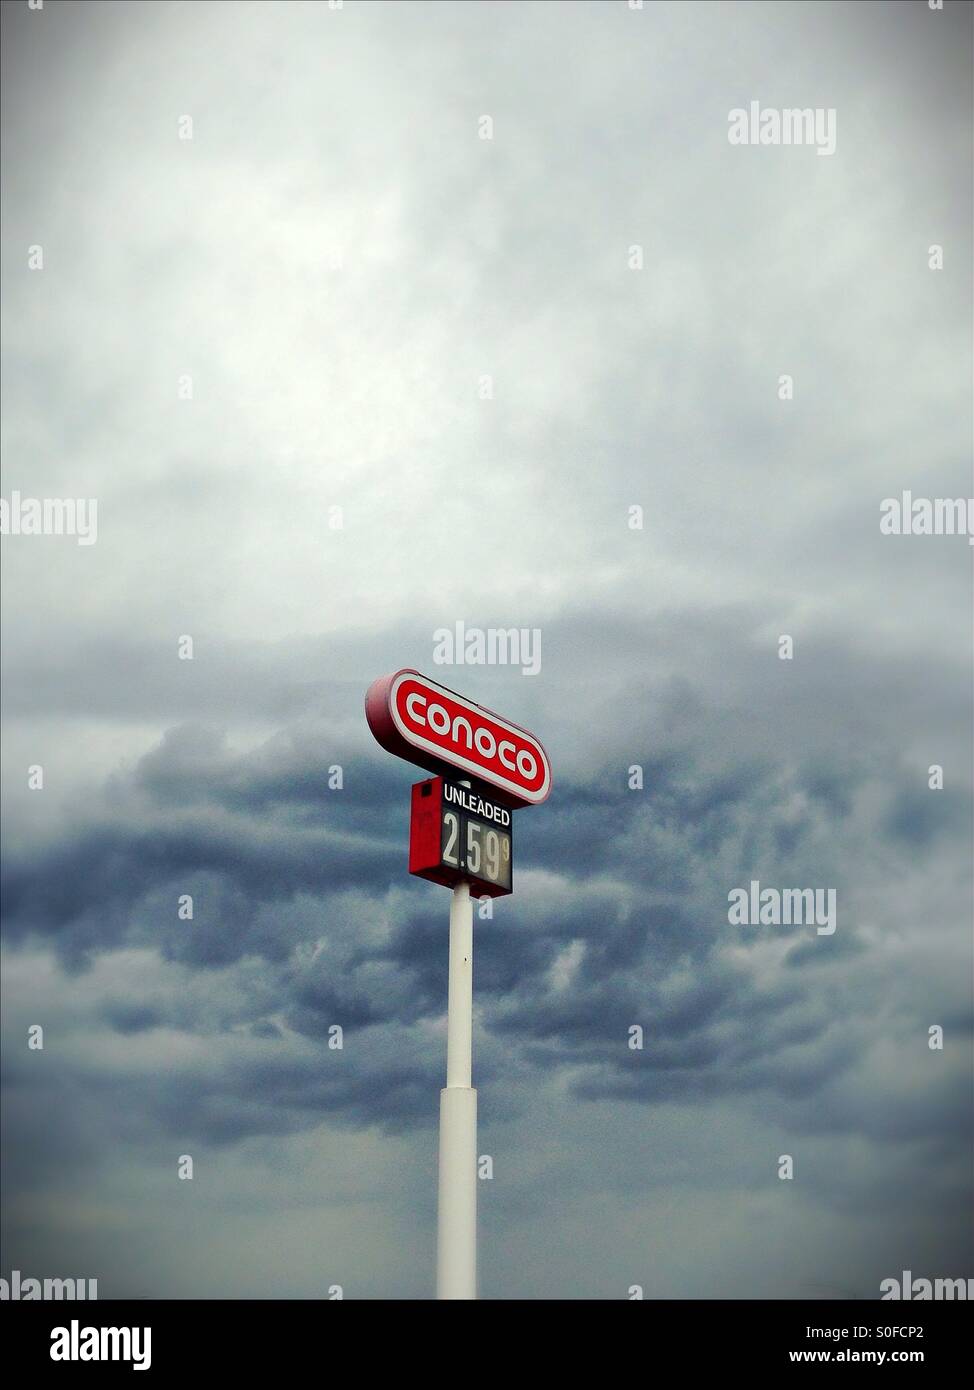 A gas station sign against a cloudy sky. Stock Photo